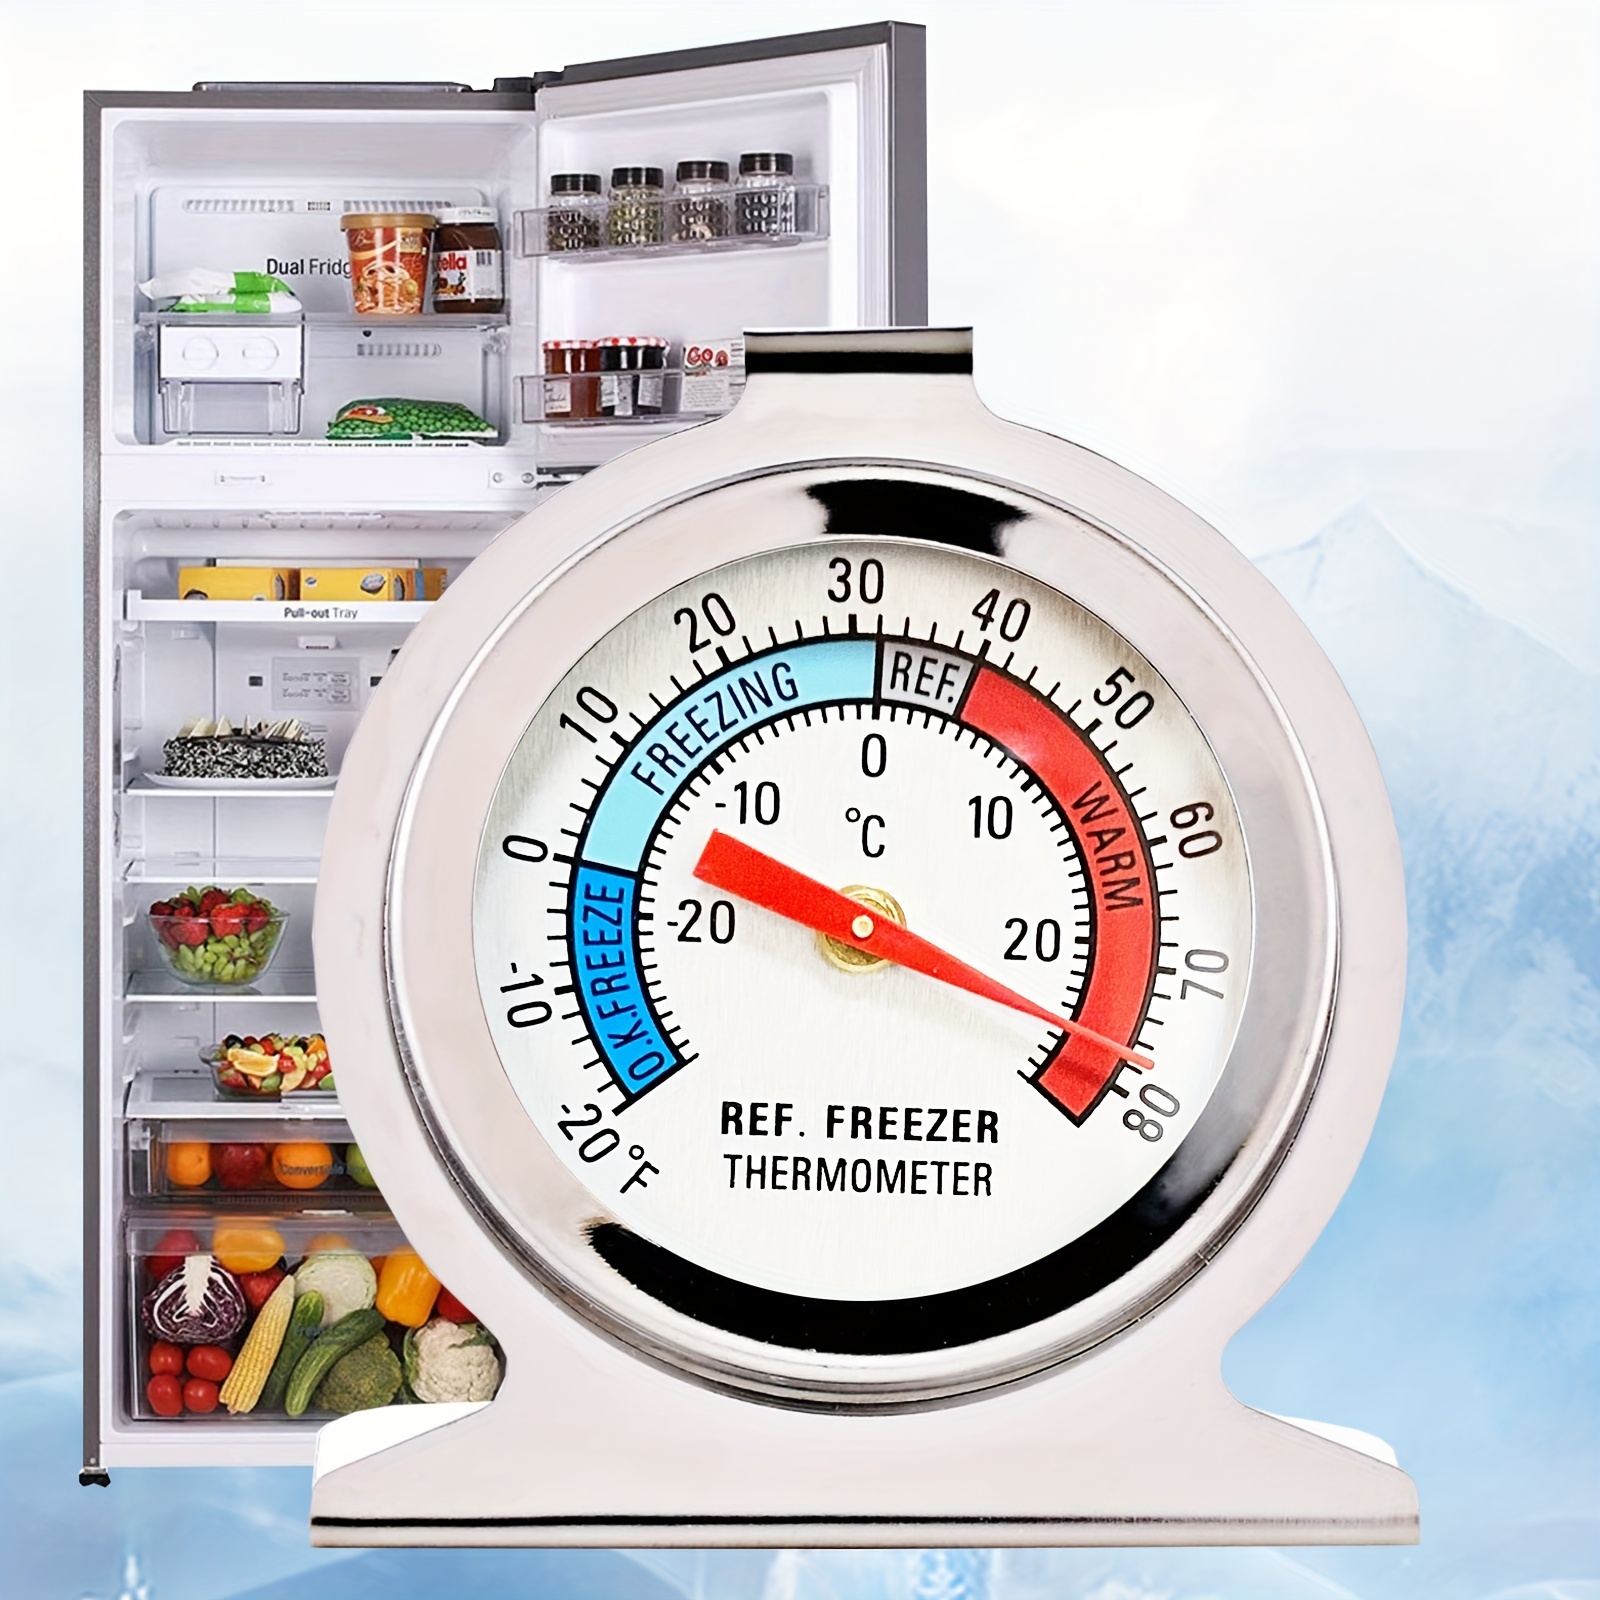 1pc Large Dial Refrigerator Thermometer with Red Indicator -30-30 Deg  C/-20-80 Deg F - Accurately Monitor Temperature for Freezer, Refrigerator,  and C